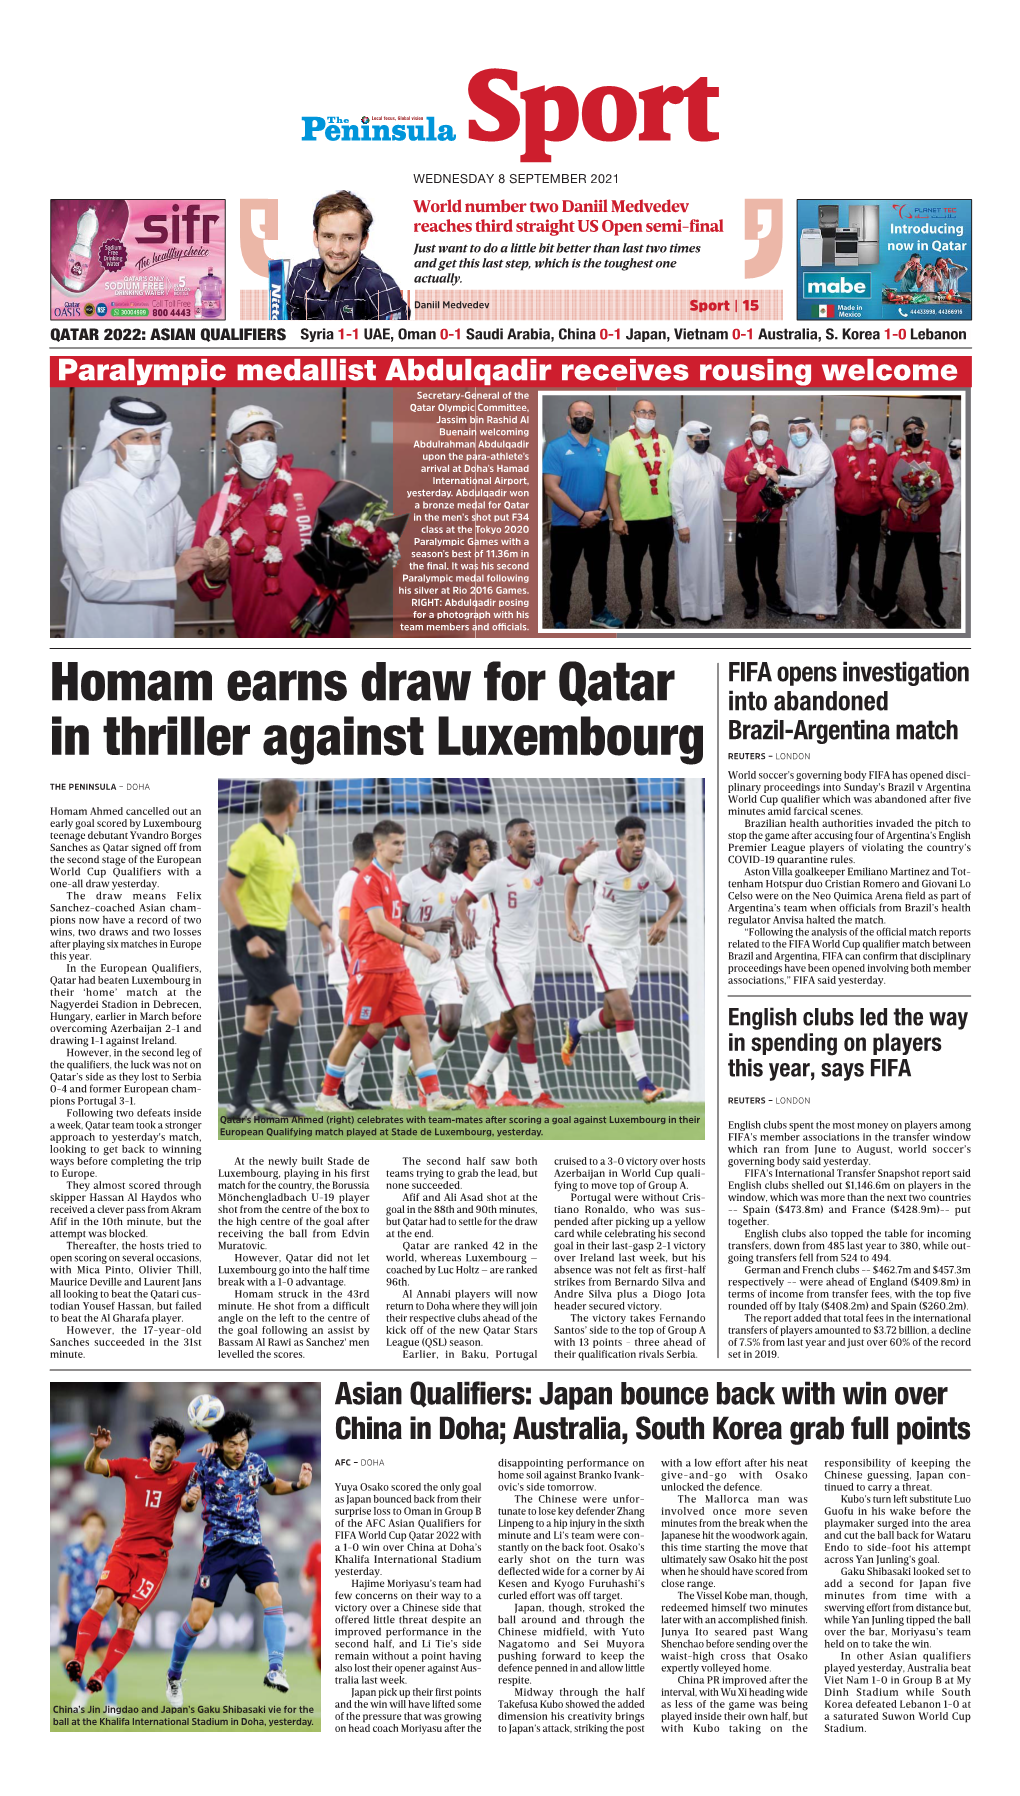 Homam Earns Draw for Qatar in Thriller Against Luxembourg